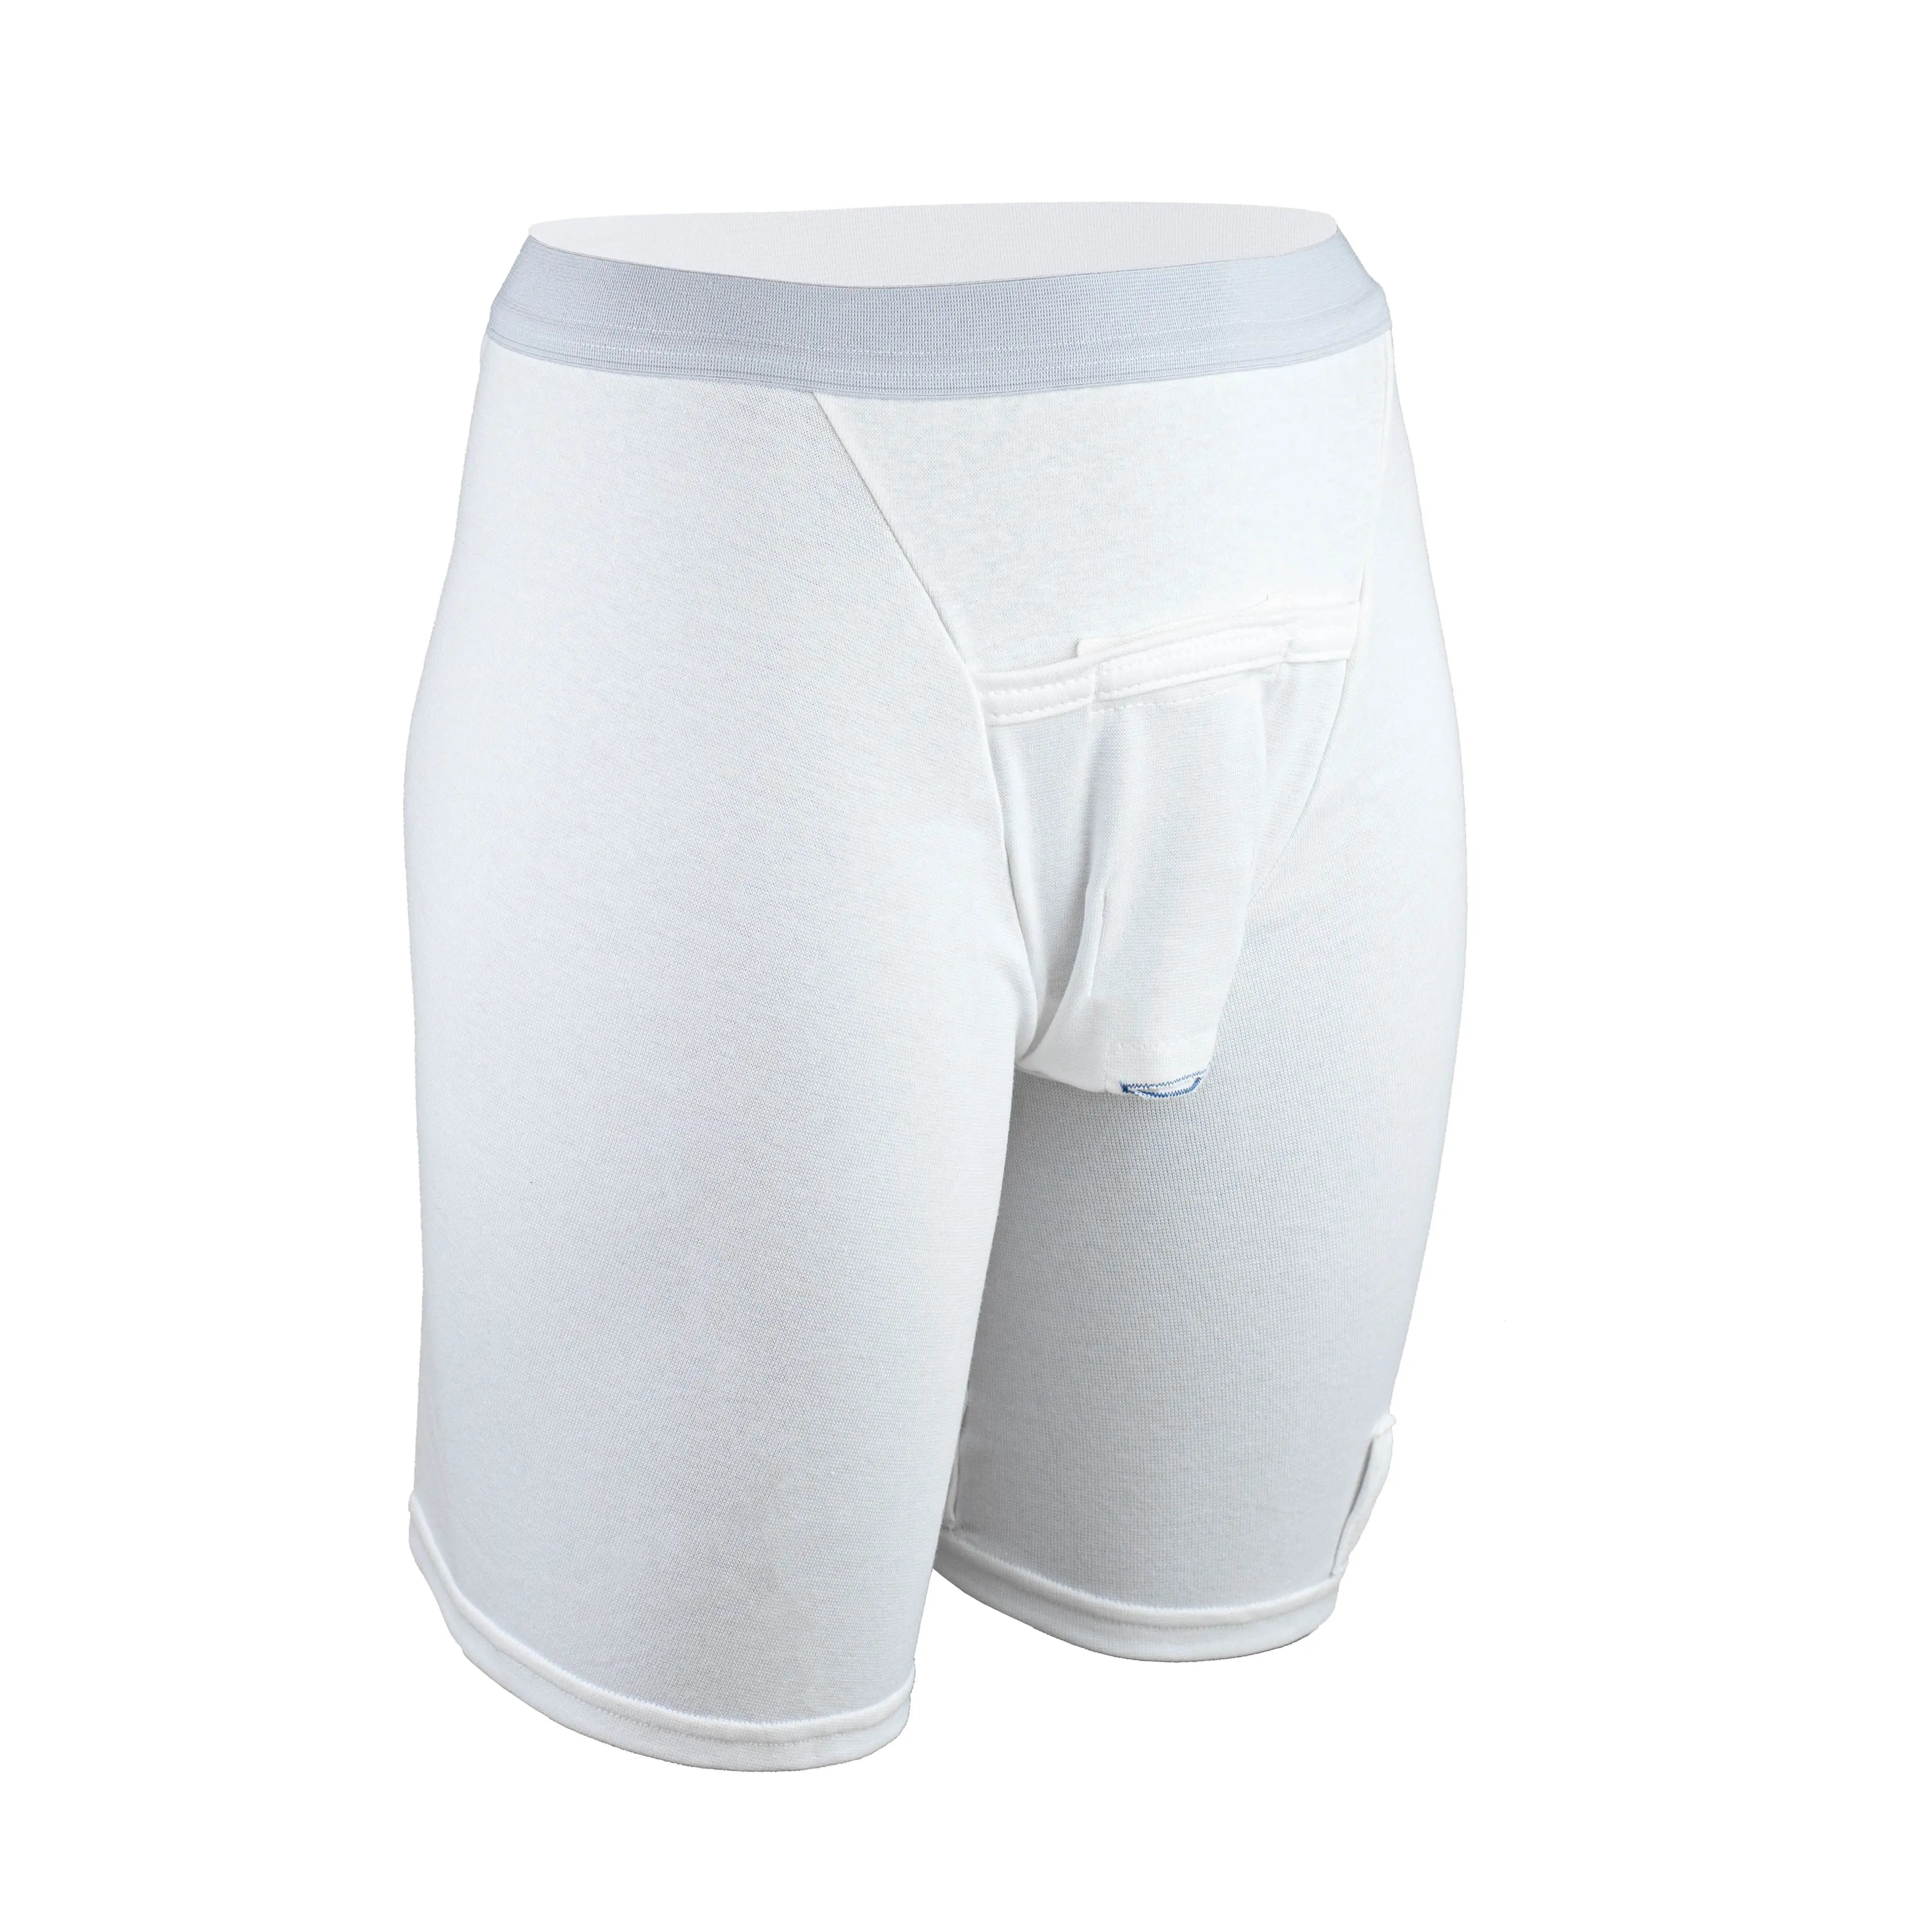 Afex Active Briefs - Male Incontinence System (x1)